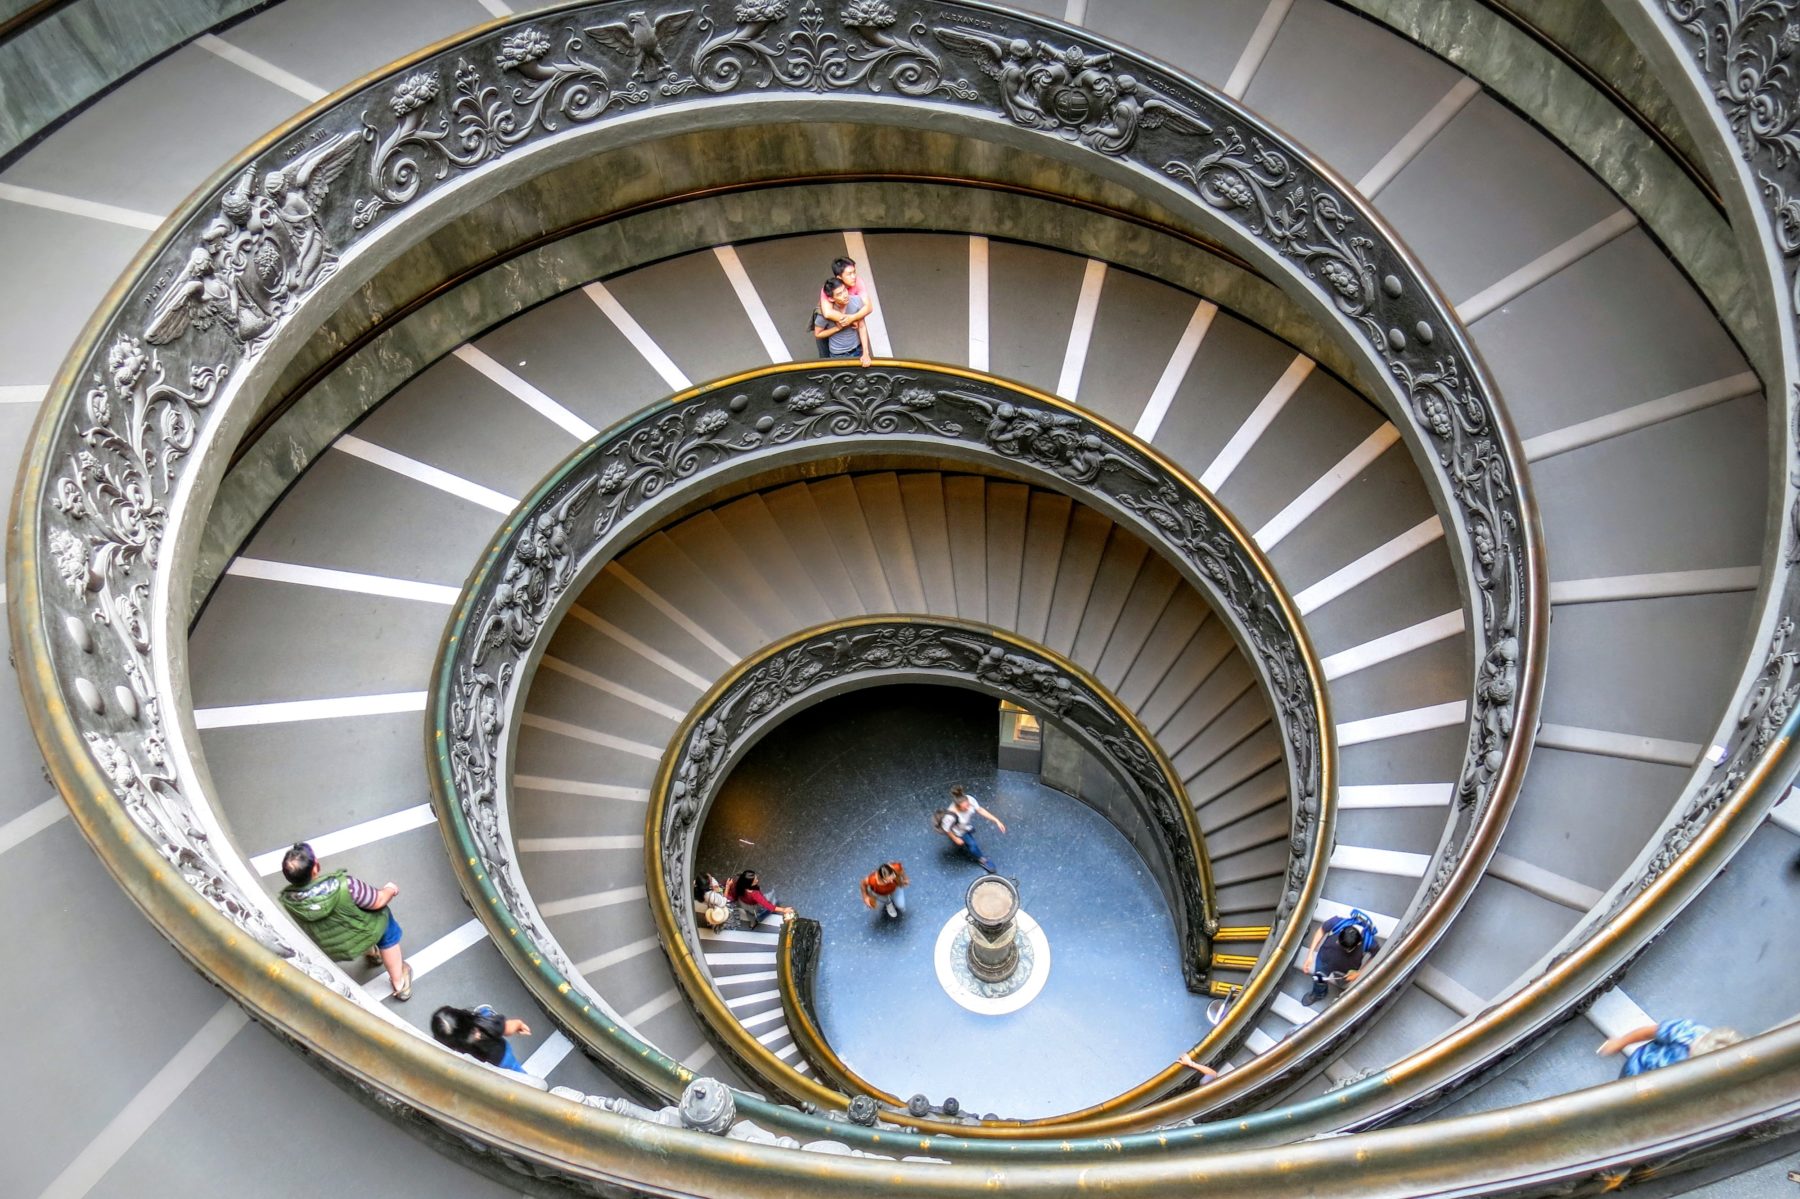 People walking down a spiral staircase at the Vatican Museum, Rome.